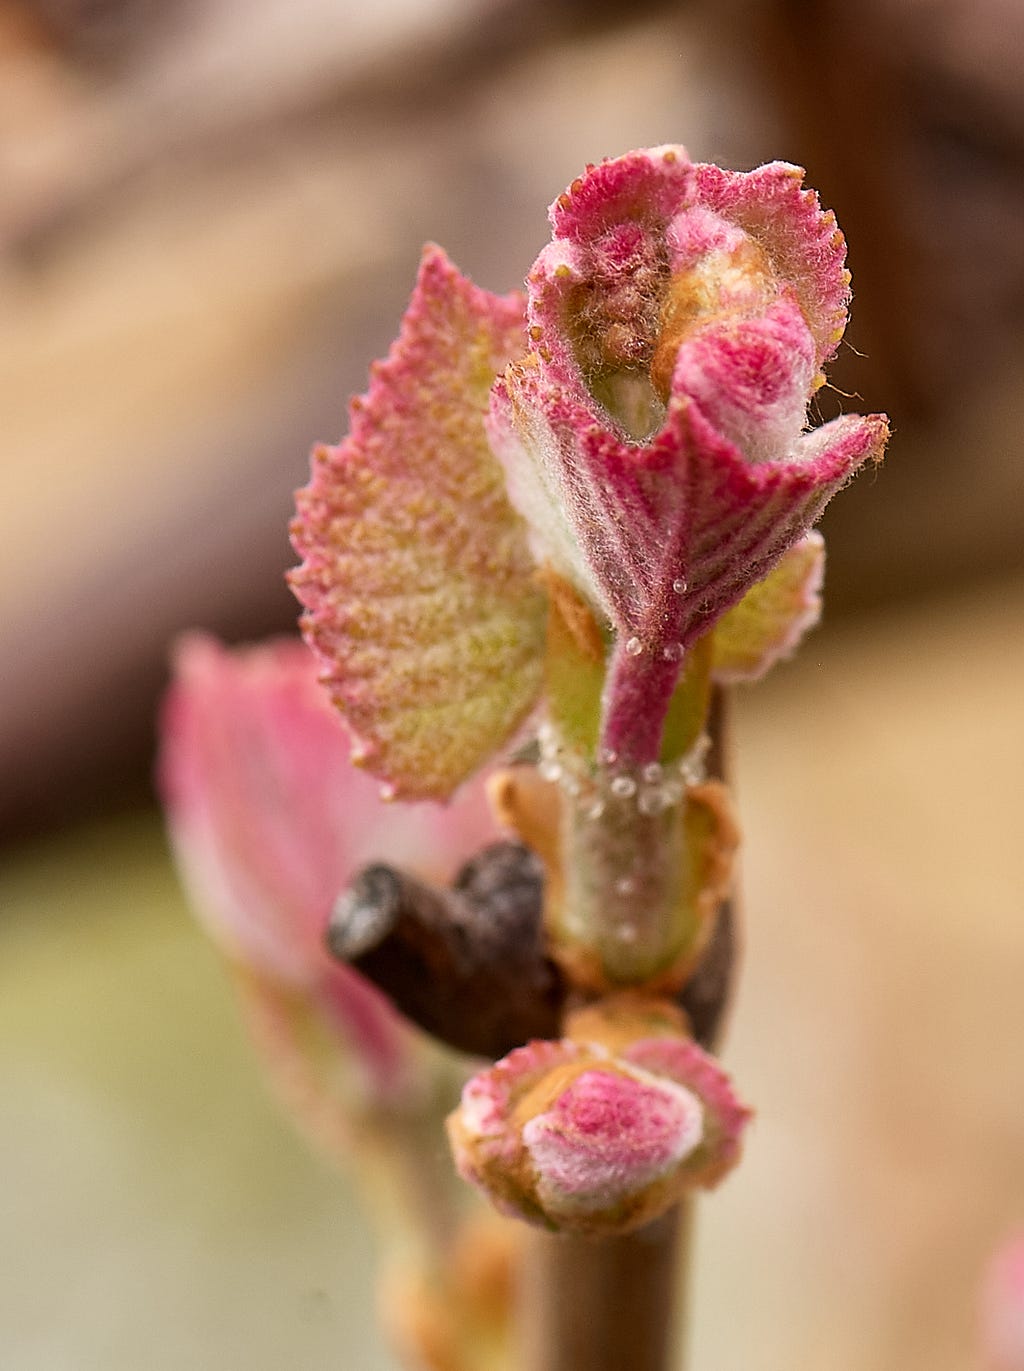 A new Concord grape bud begining to unfold exposing the early development of a cluster of grape flowers.